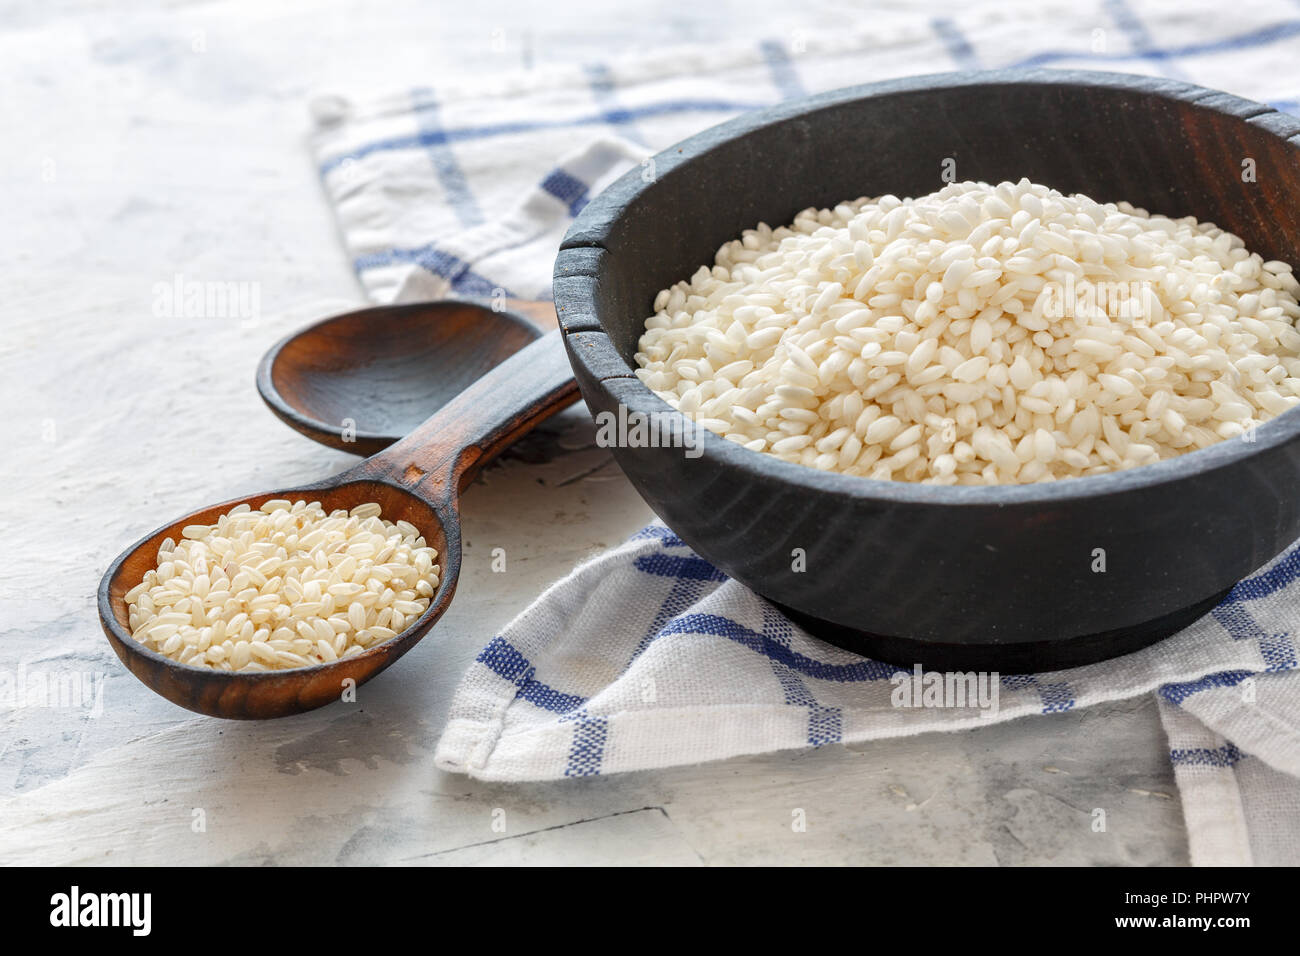 Different varieties of white rice. Stock Photo